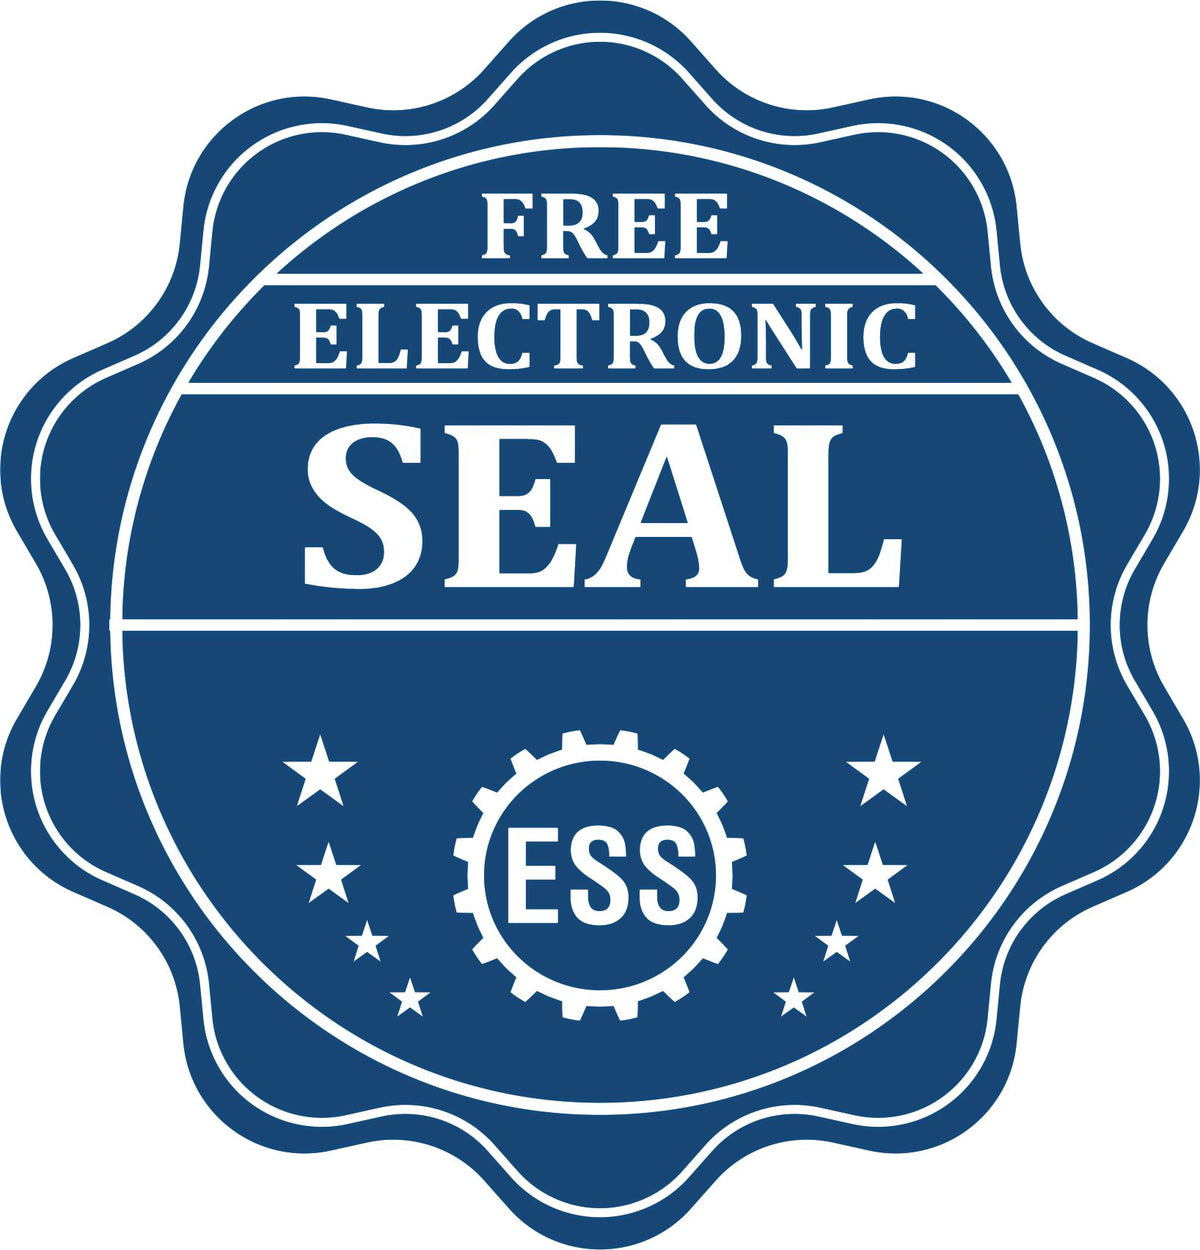 A badge showing a free electronic seal for the Hybrid Arizona Landscape Architect Seal with stars and the ESS gear on the emblem.